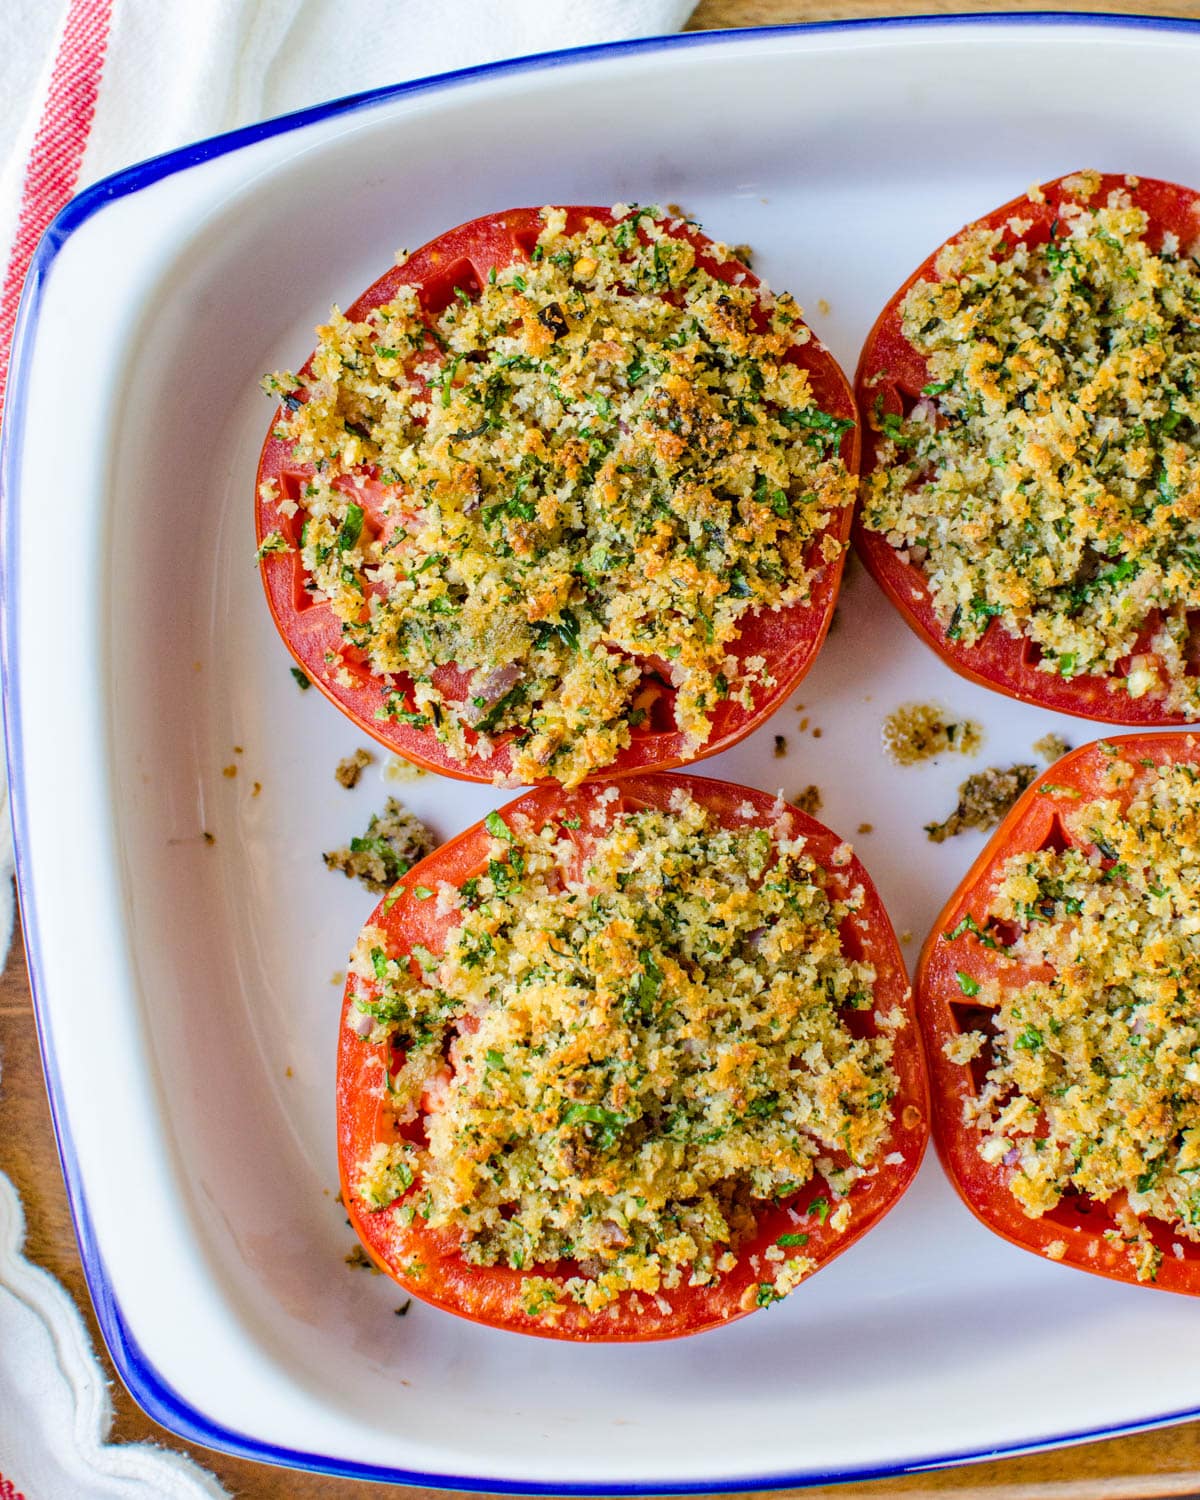 The baked provencal tomatoes after cooking.